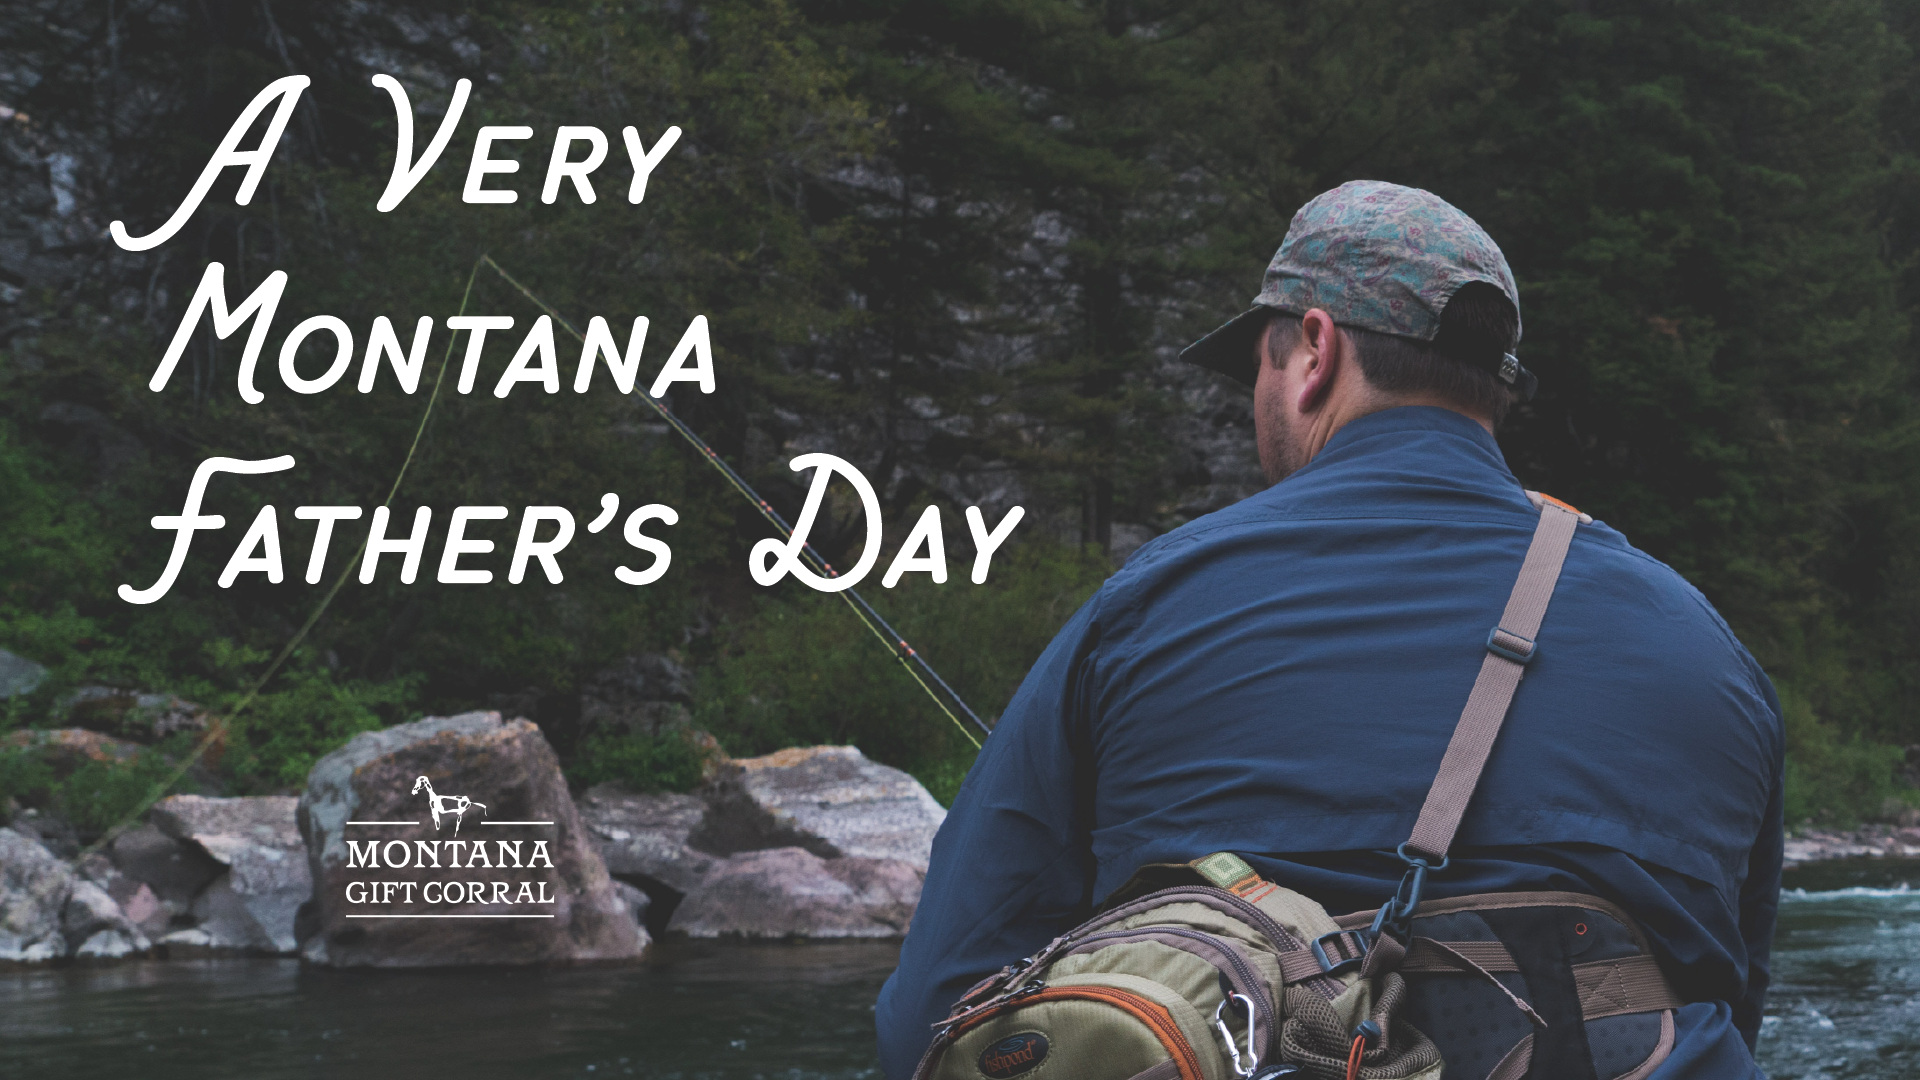 A Very Montana Father's Day